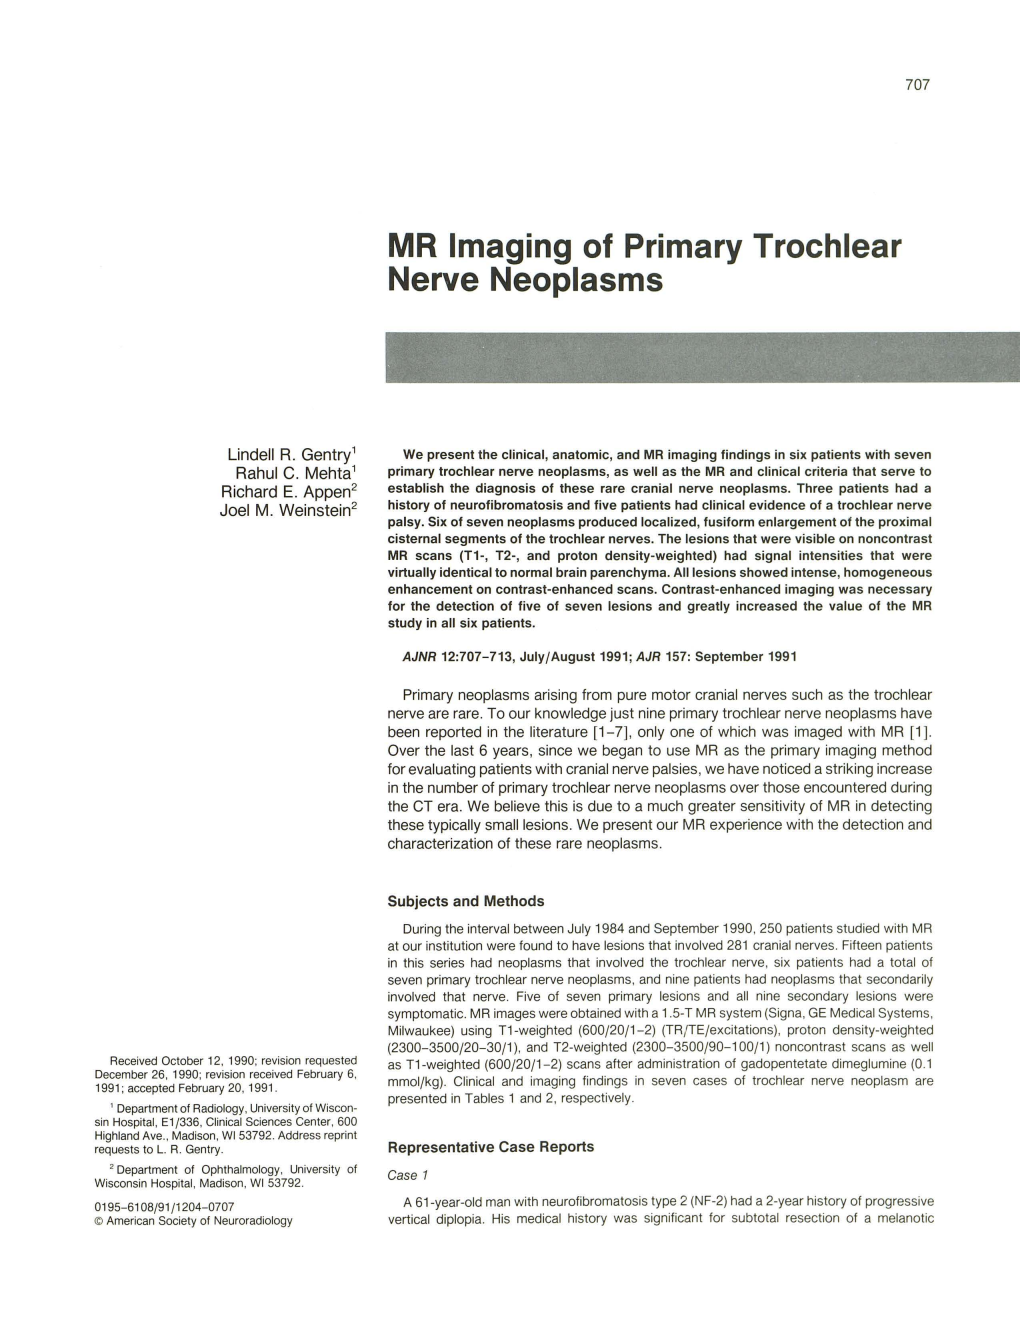 MR Imaging of Primary Trochlear Nerve Neoplasms